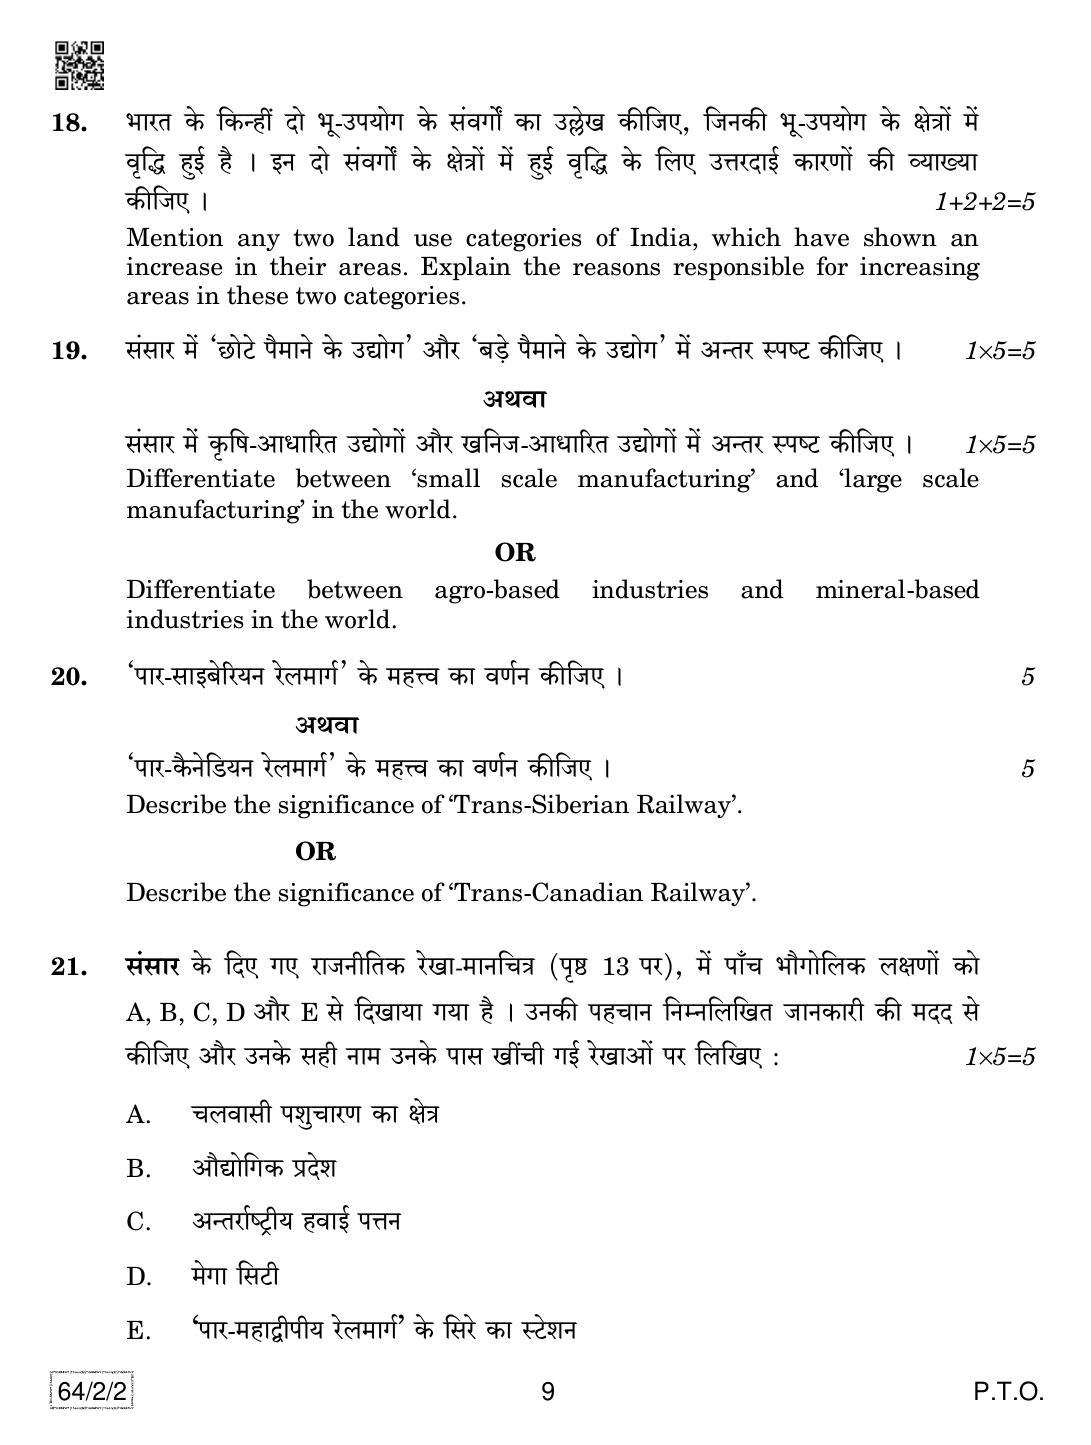 CBSE Class 12 64-2-2 Geography 2019 Question Paper - Page 9